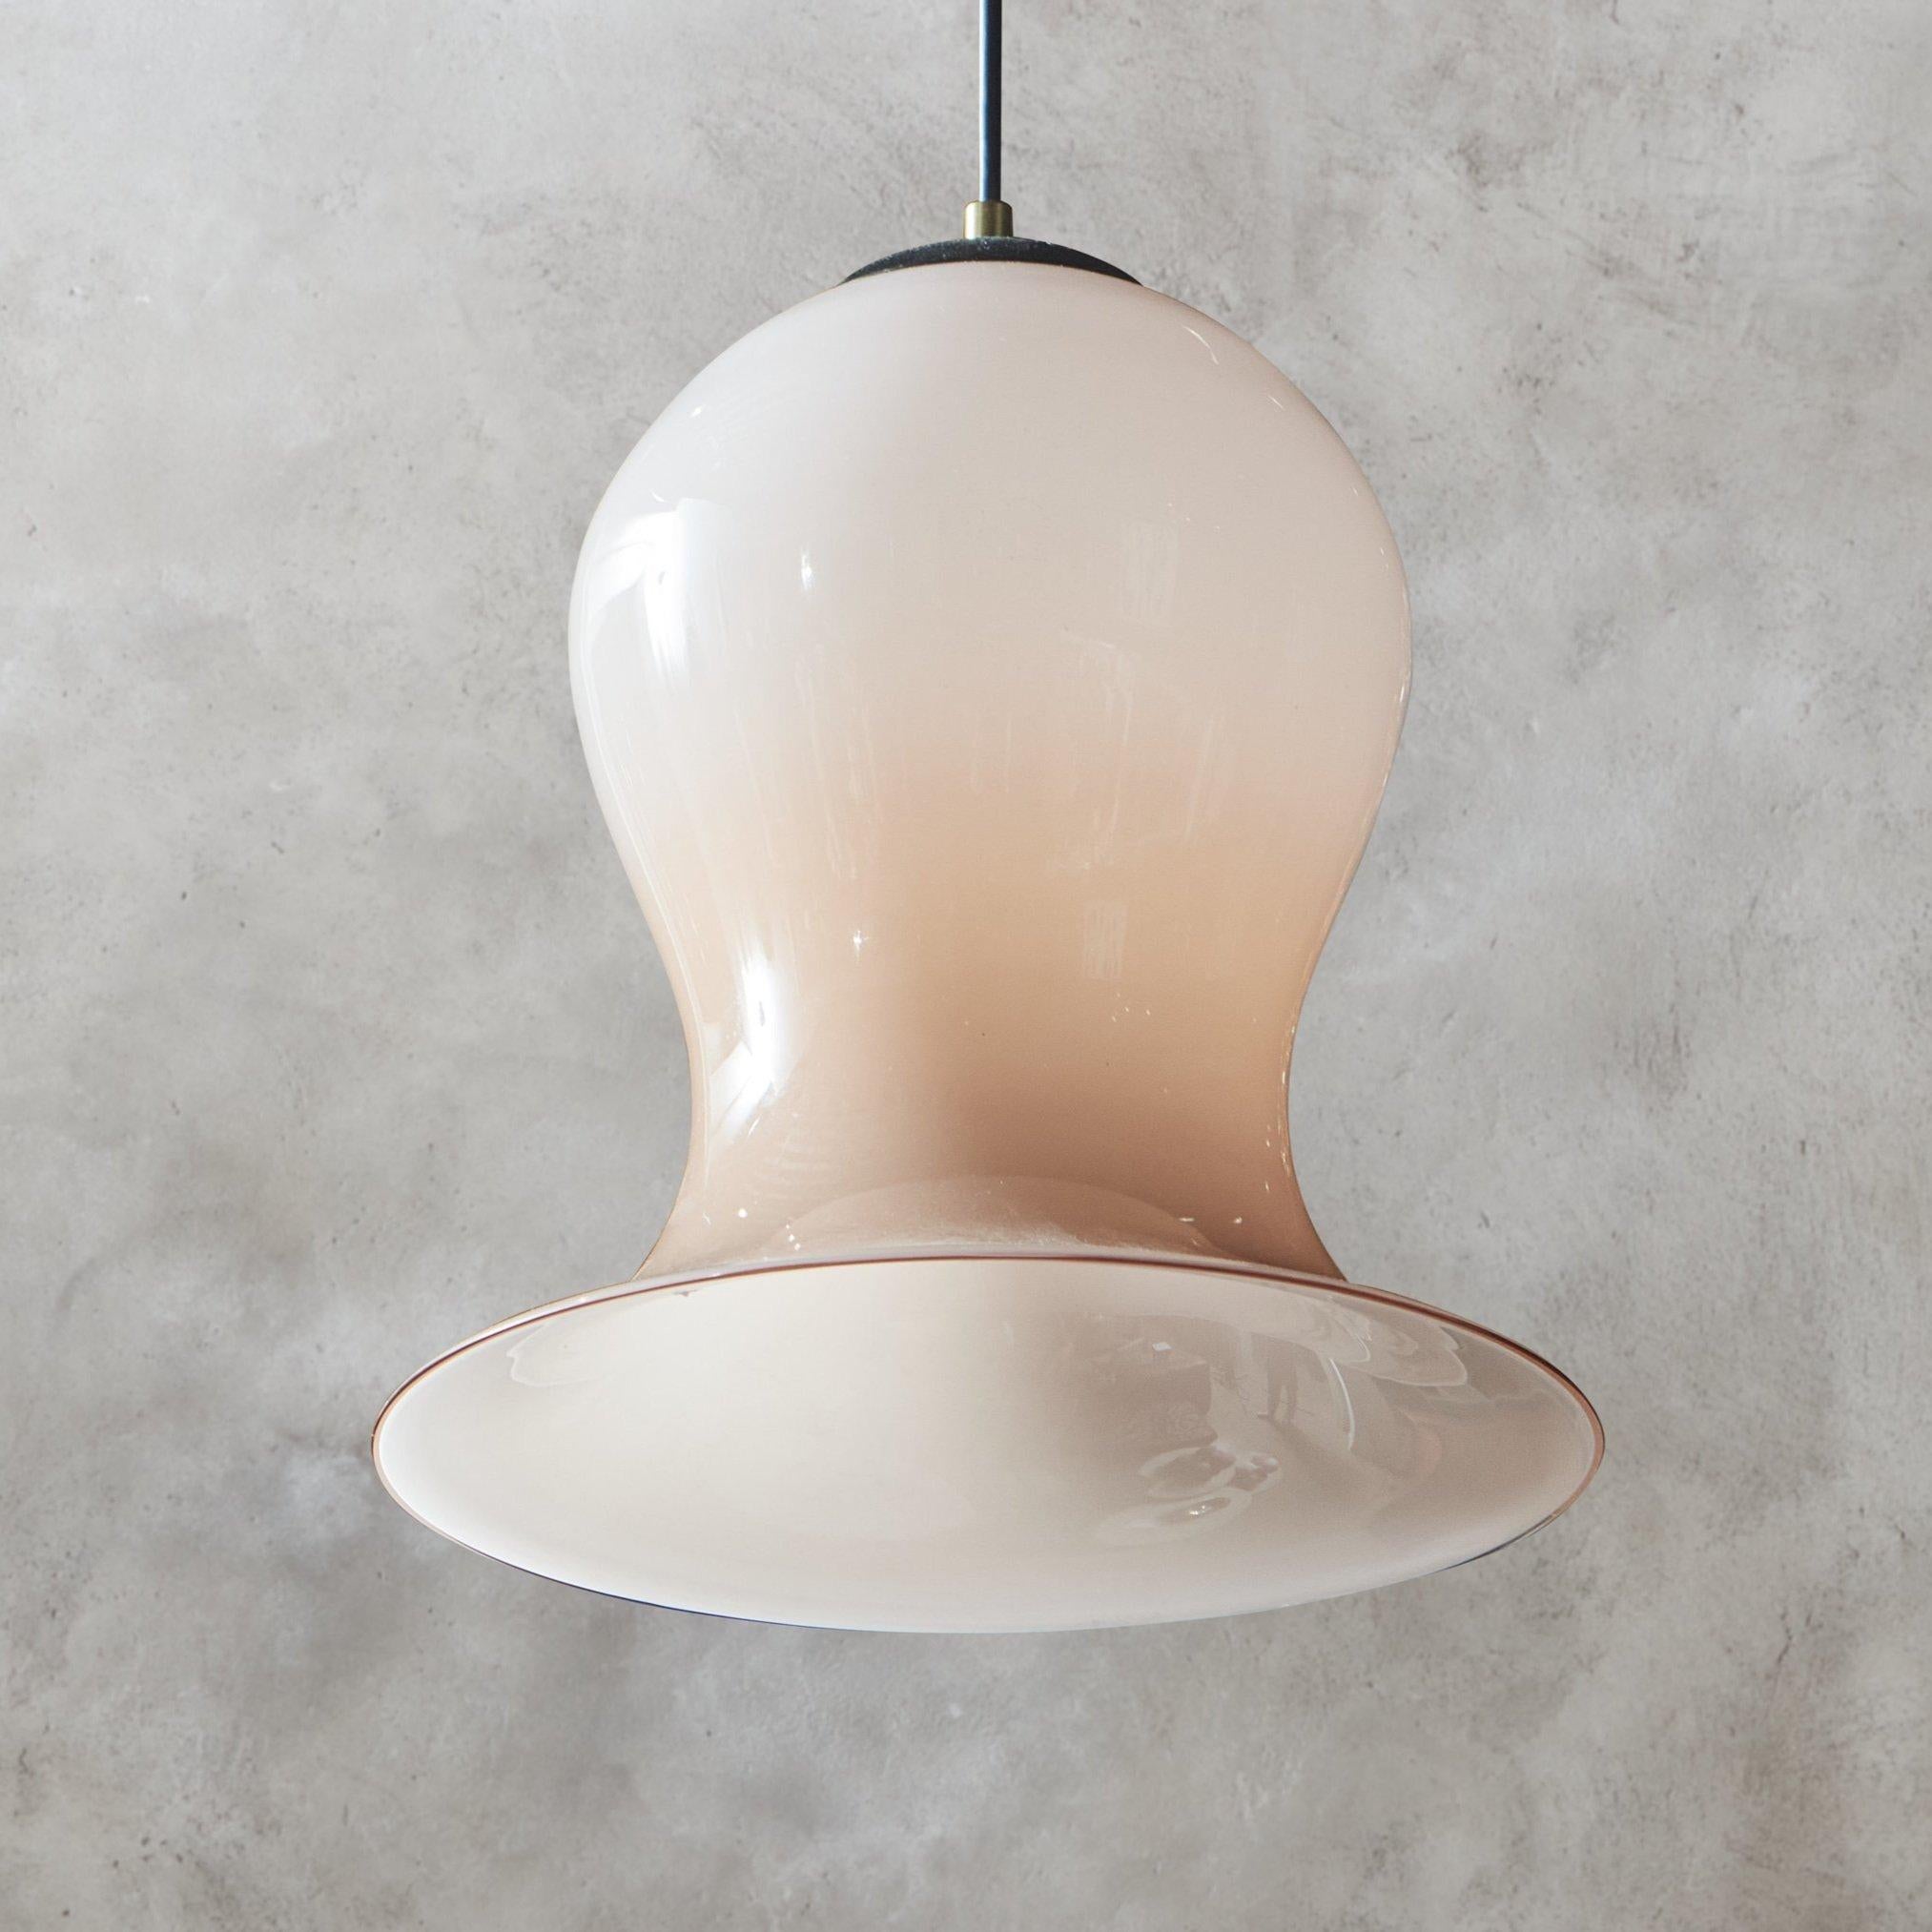 A Mid Century pendant light featuring a bell-shaped hand blown Murano glass shade in a gorgeous blush pink hue with a subtle red bottom trim. This fixture has black metal socket cover and hangs from a black cord with a new black metal canopy.